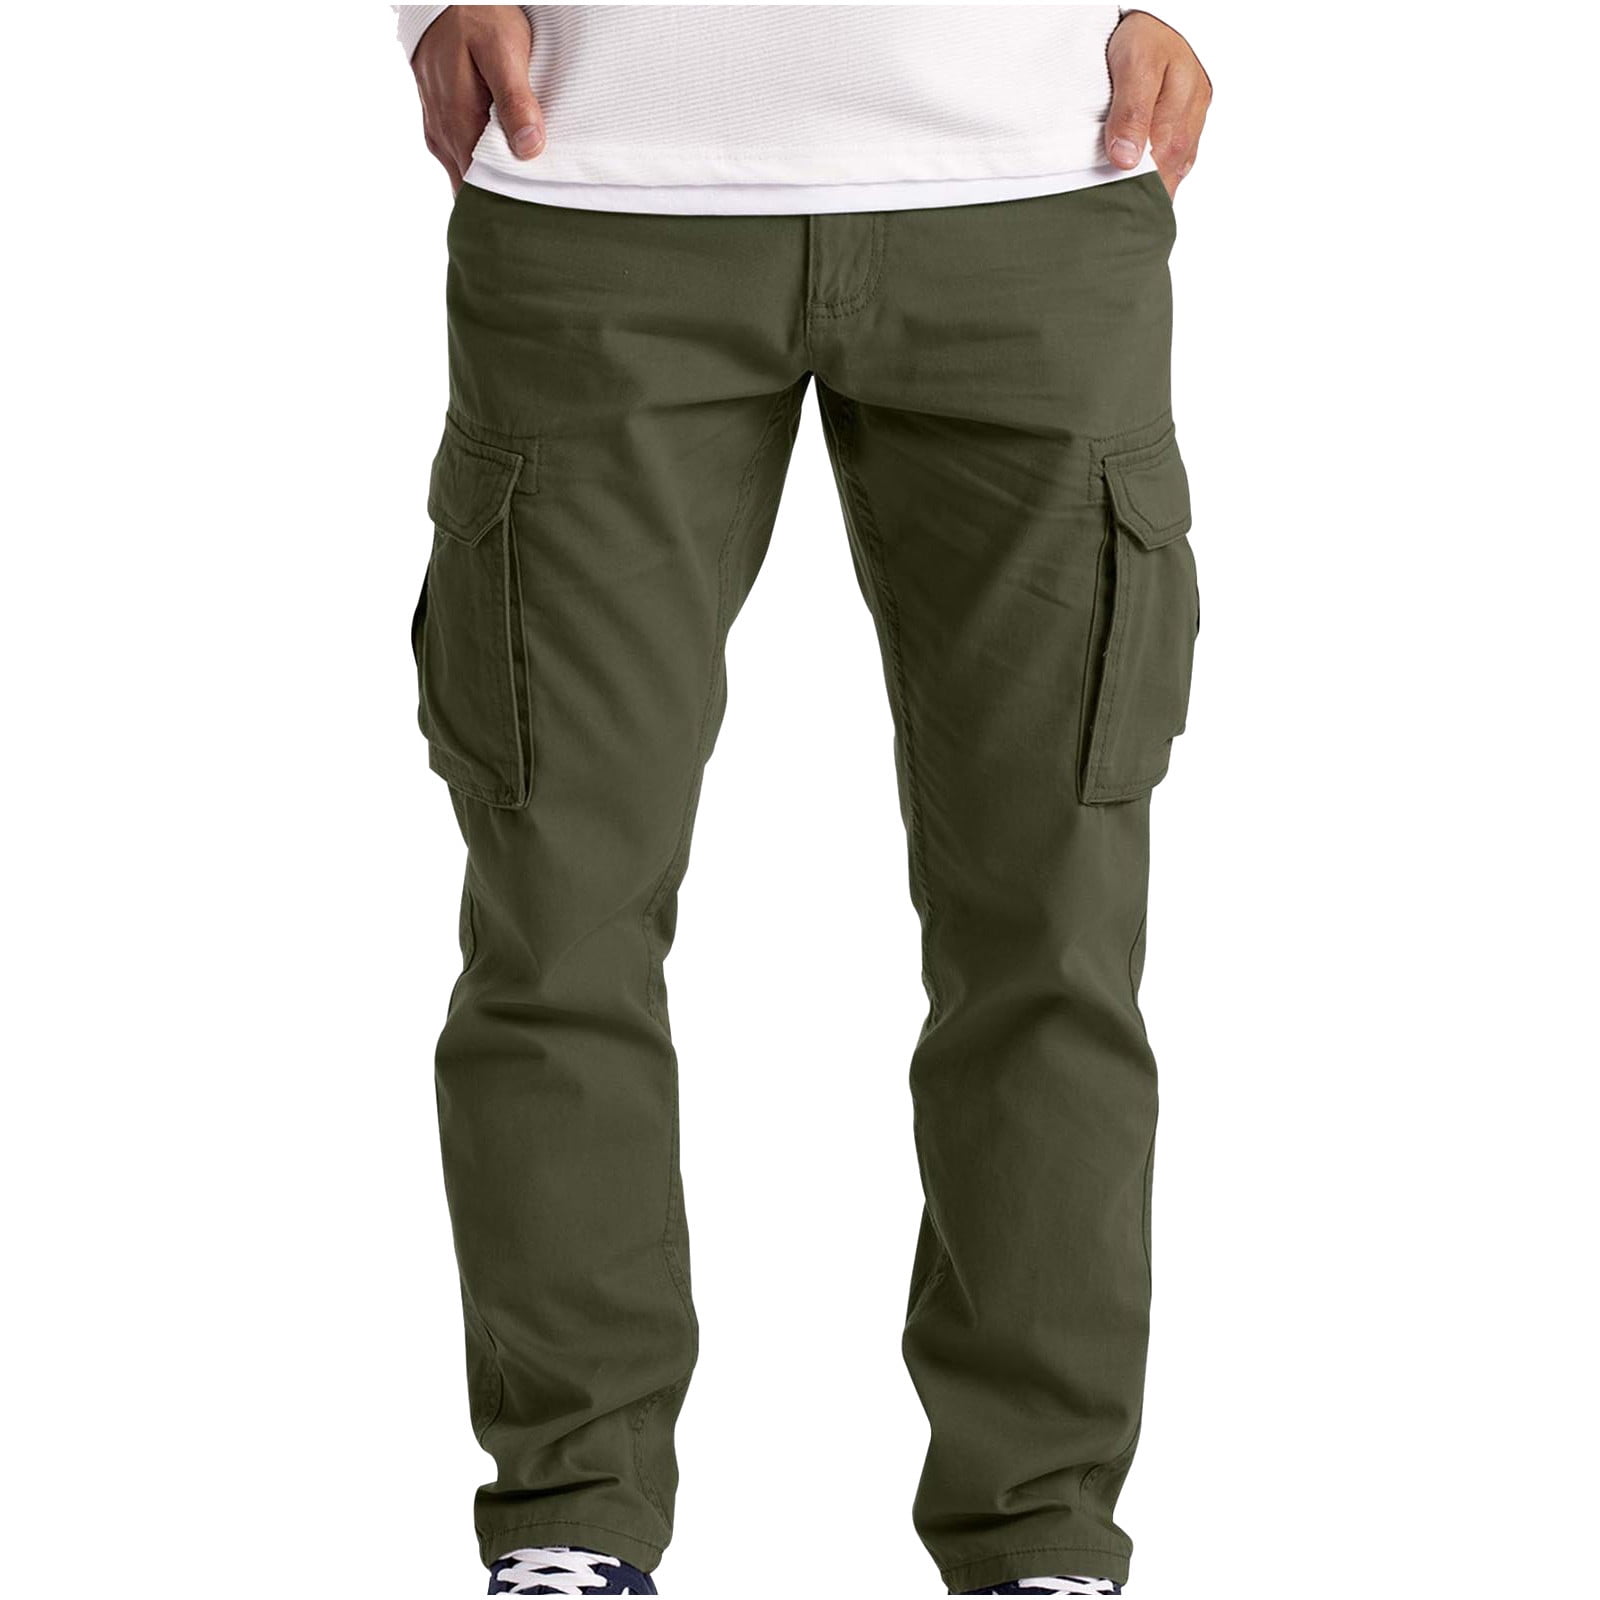 Cargo pants for men Trousers Work Wear Combat Cargo 6 Pocket Full Pants 511  Tactical Pants Outdoor sports pants Army Green L